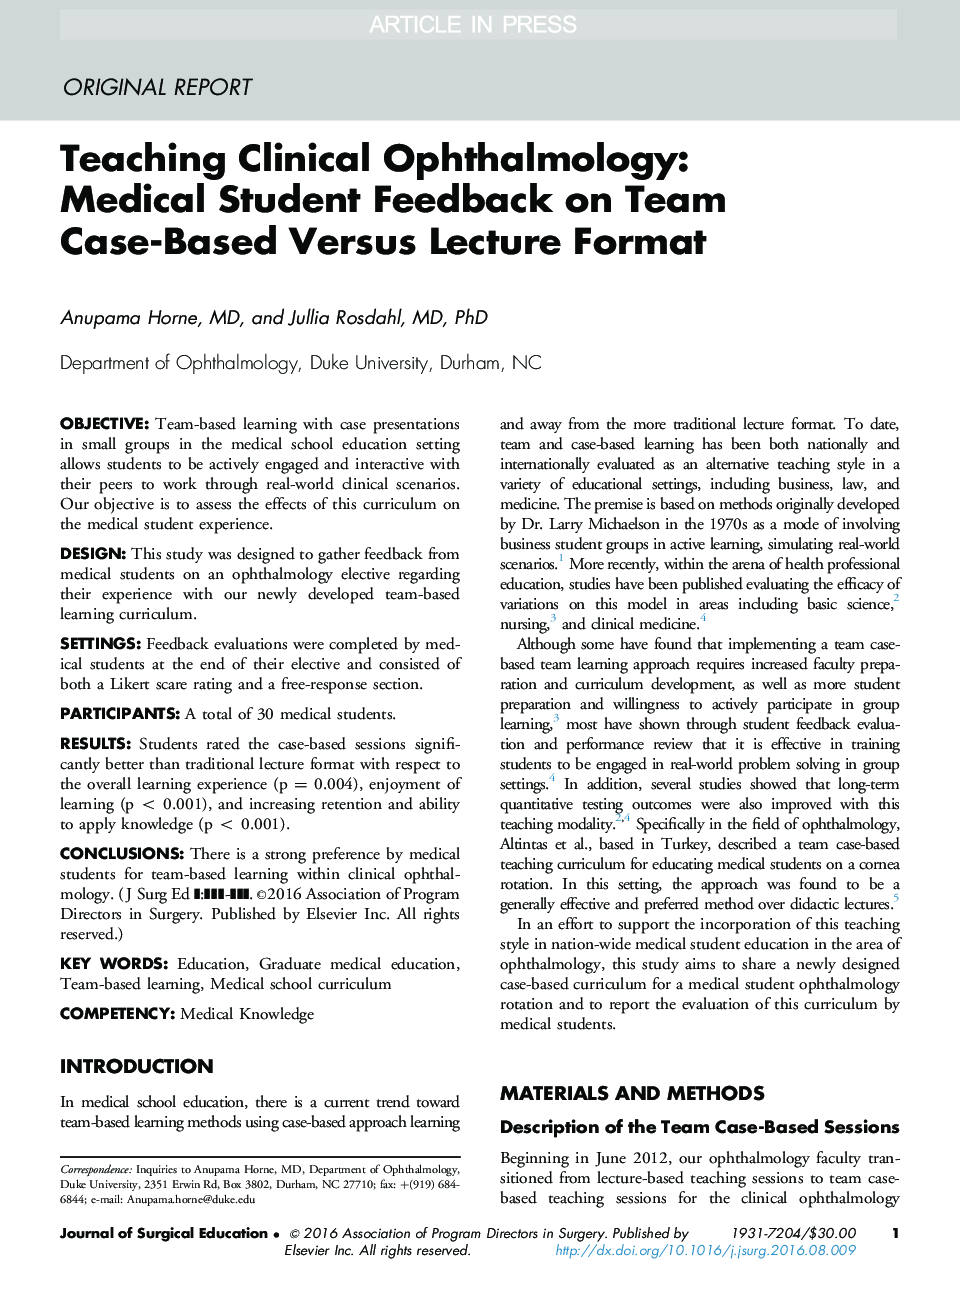 Teaching Clinical Ophthalmology: Medical Student Feedback on Team Case-Based Versus Lecture Format